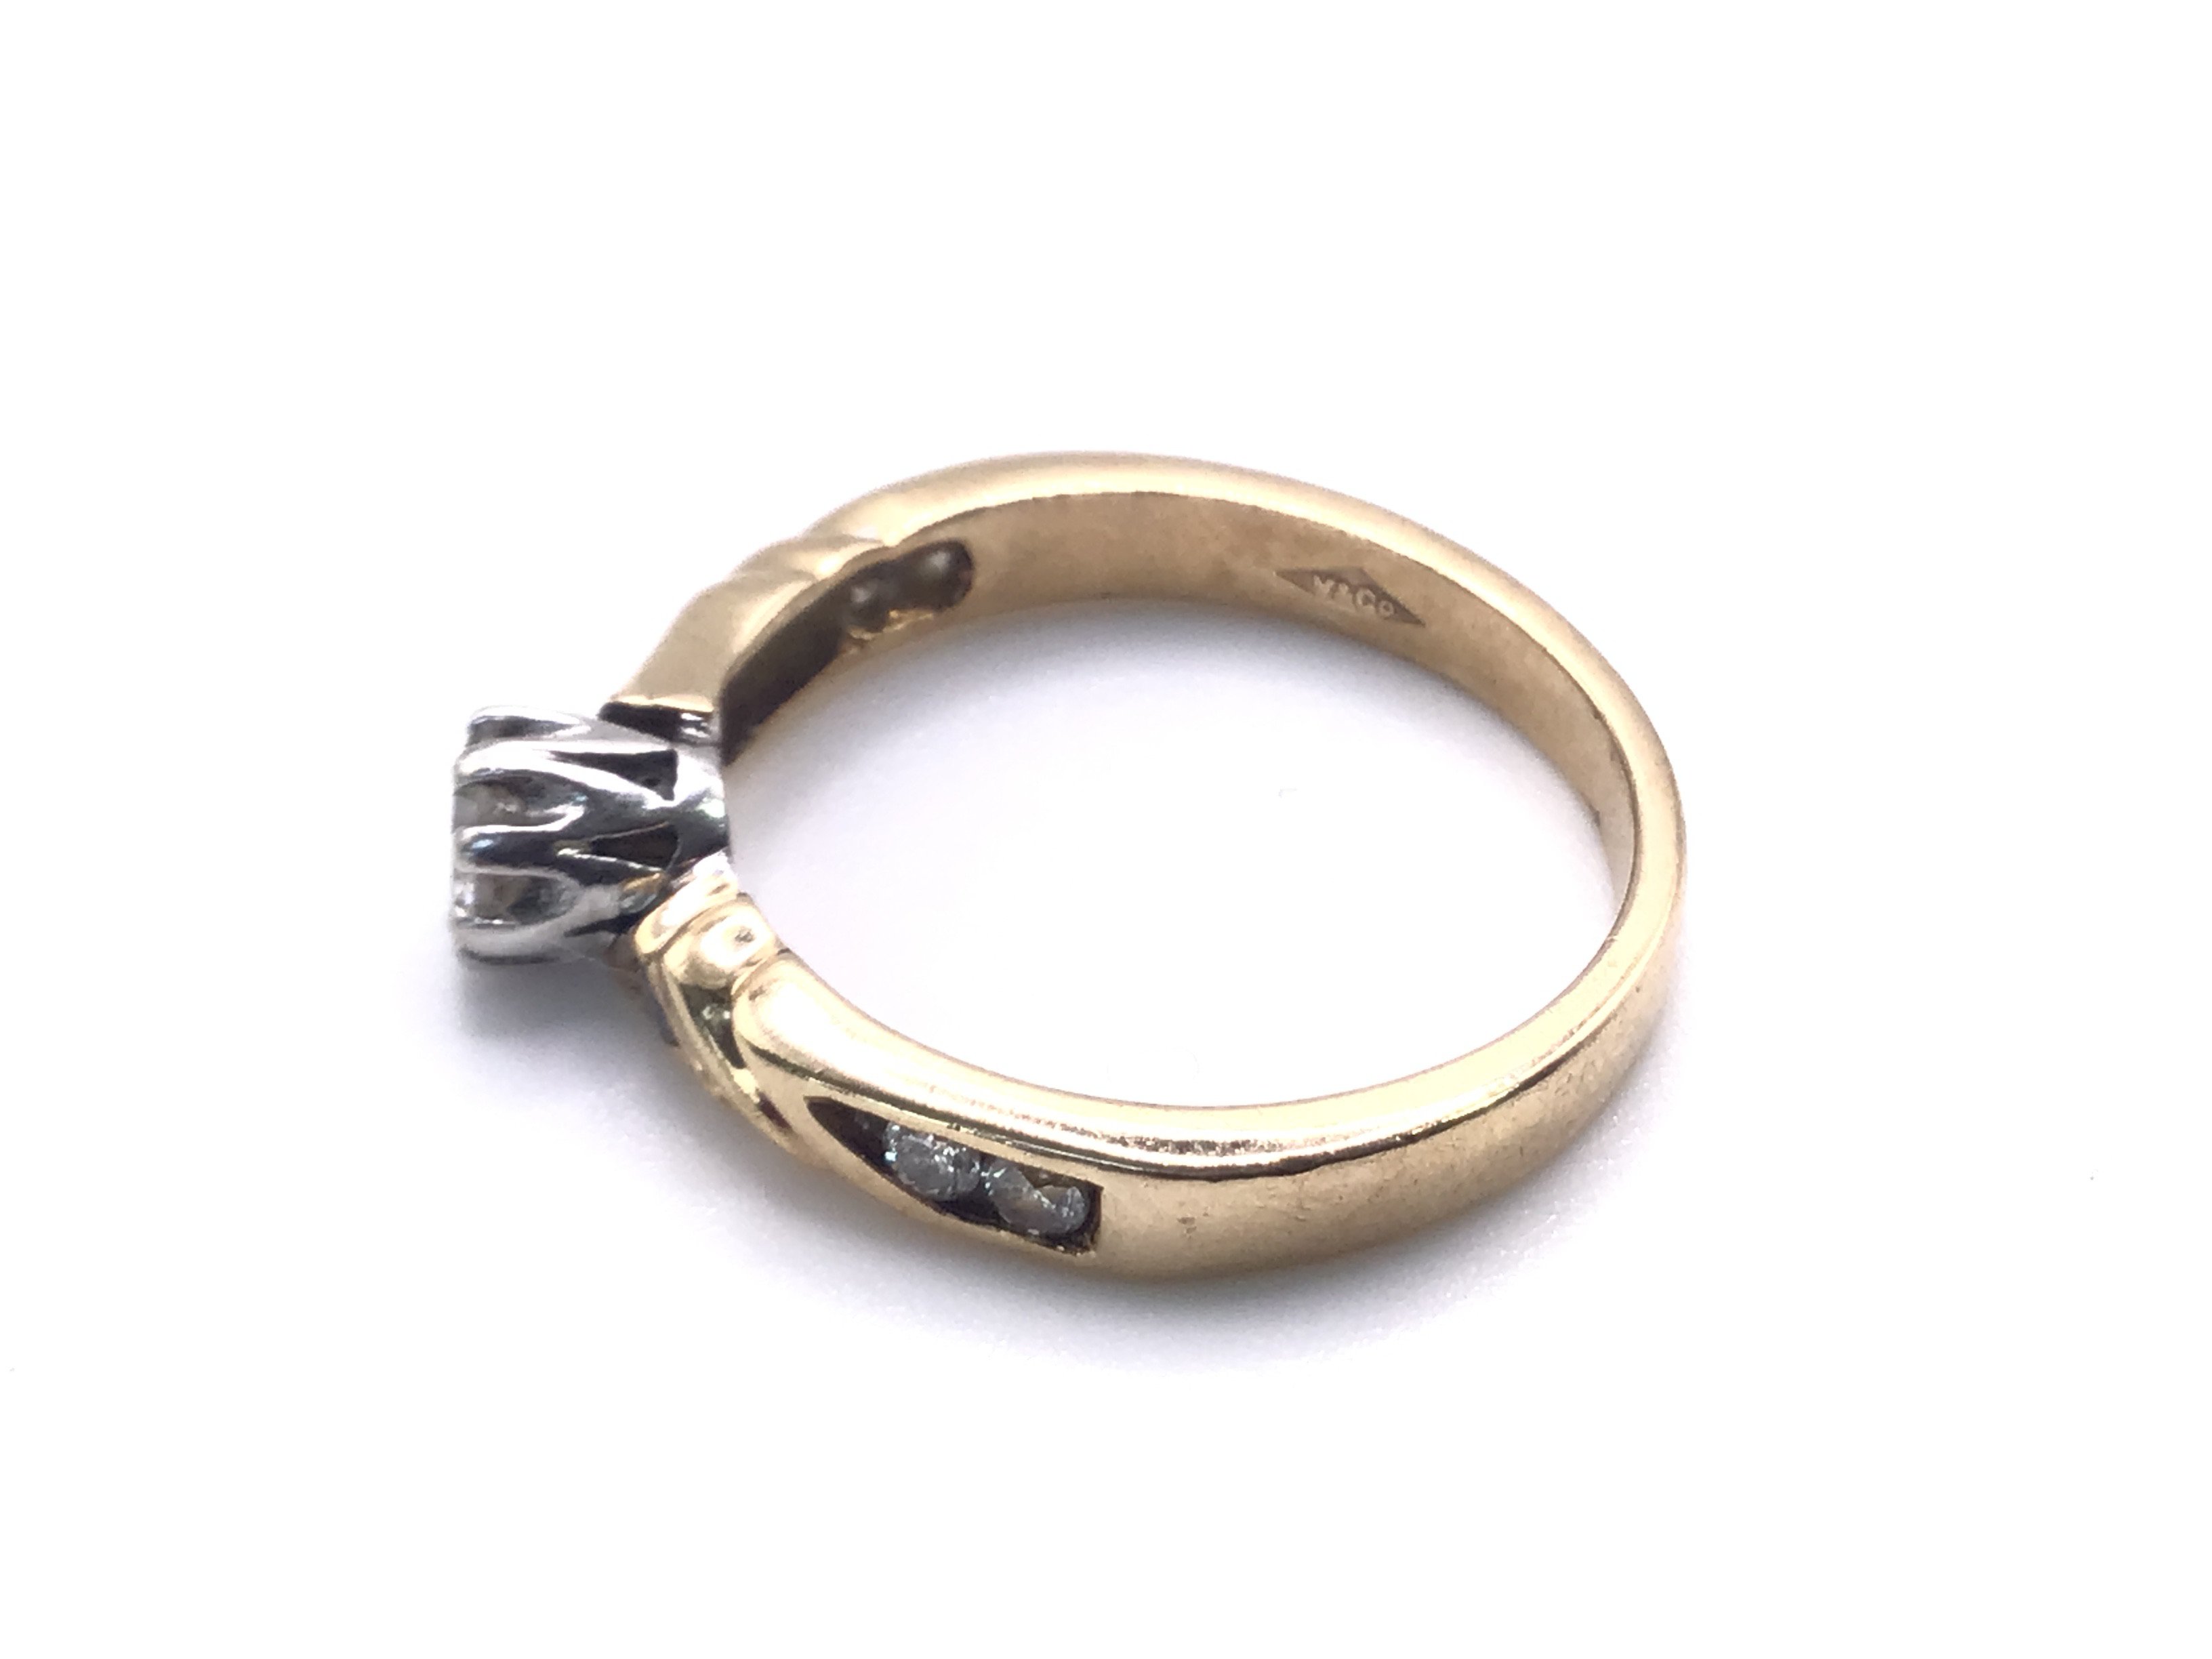 A 9 Ct Gold Dimond Solitaire with Diamonds on Band - Image 2 of 4